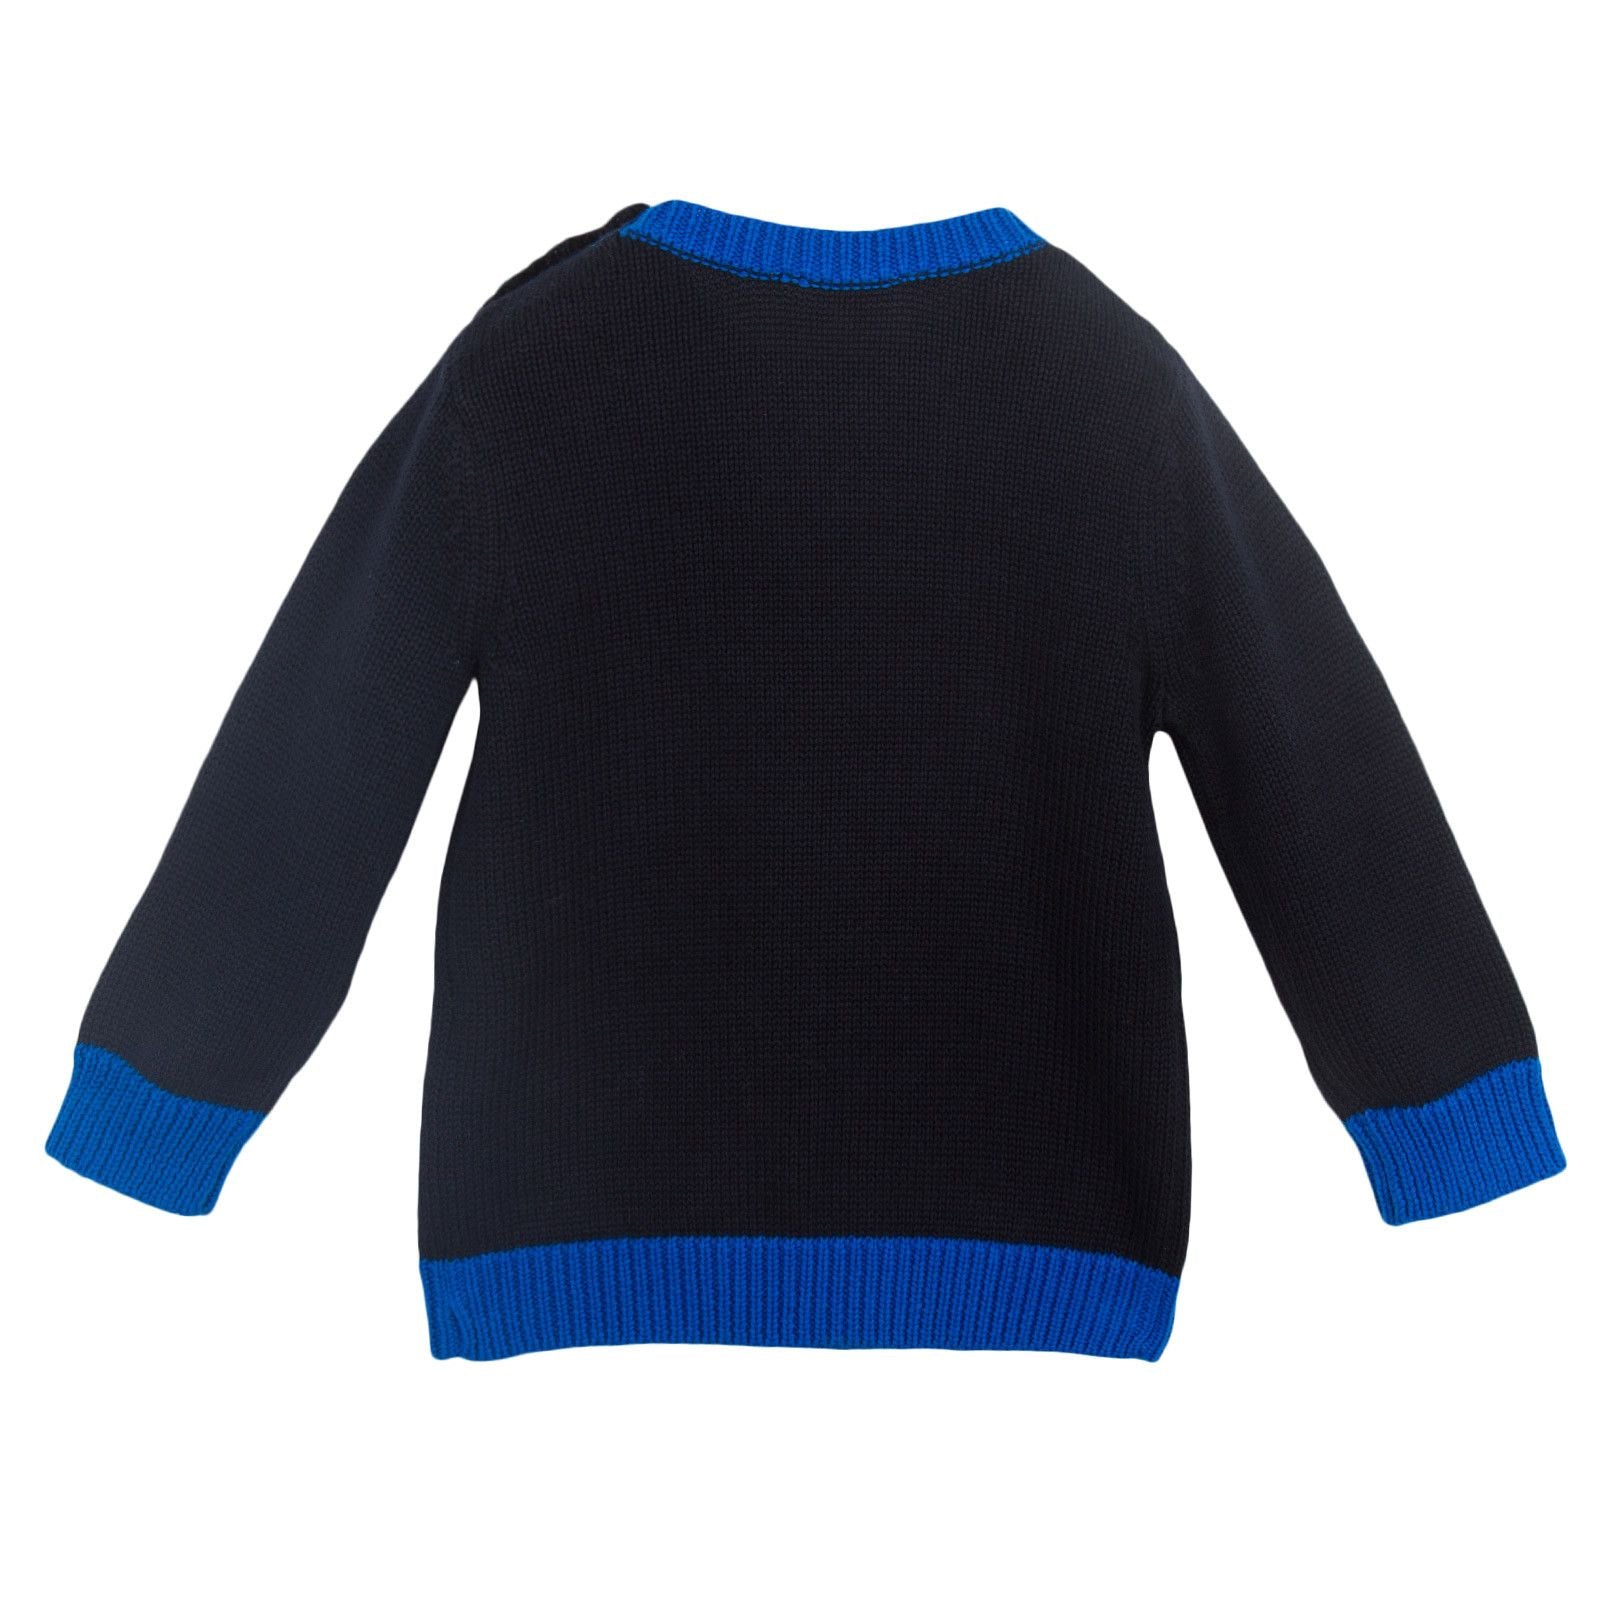 Boys Navy Blue 'Mr Marc' Knitted Sweater - CÉMAROSE | Children's Fashion Store - 2